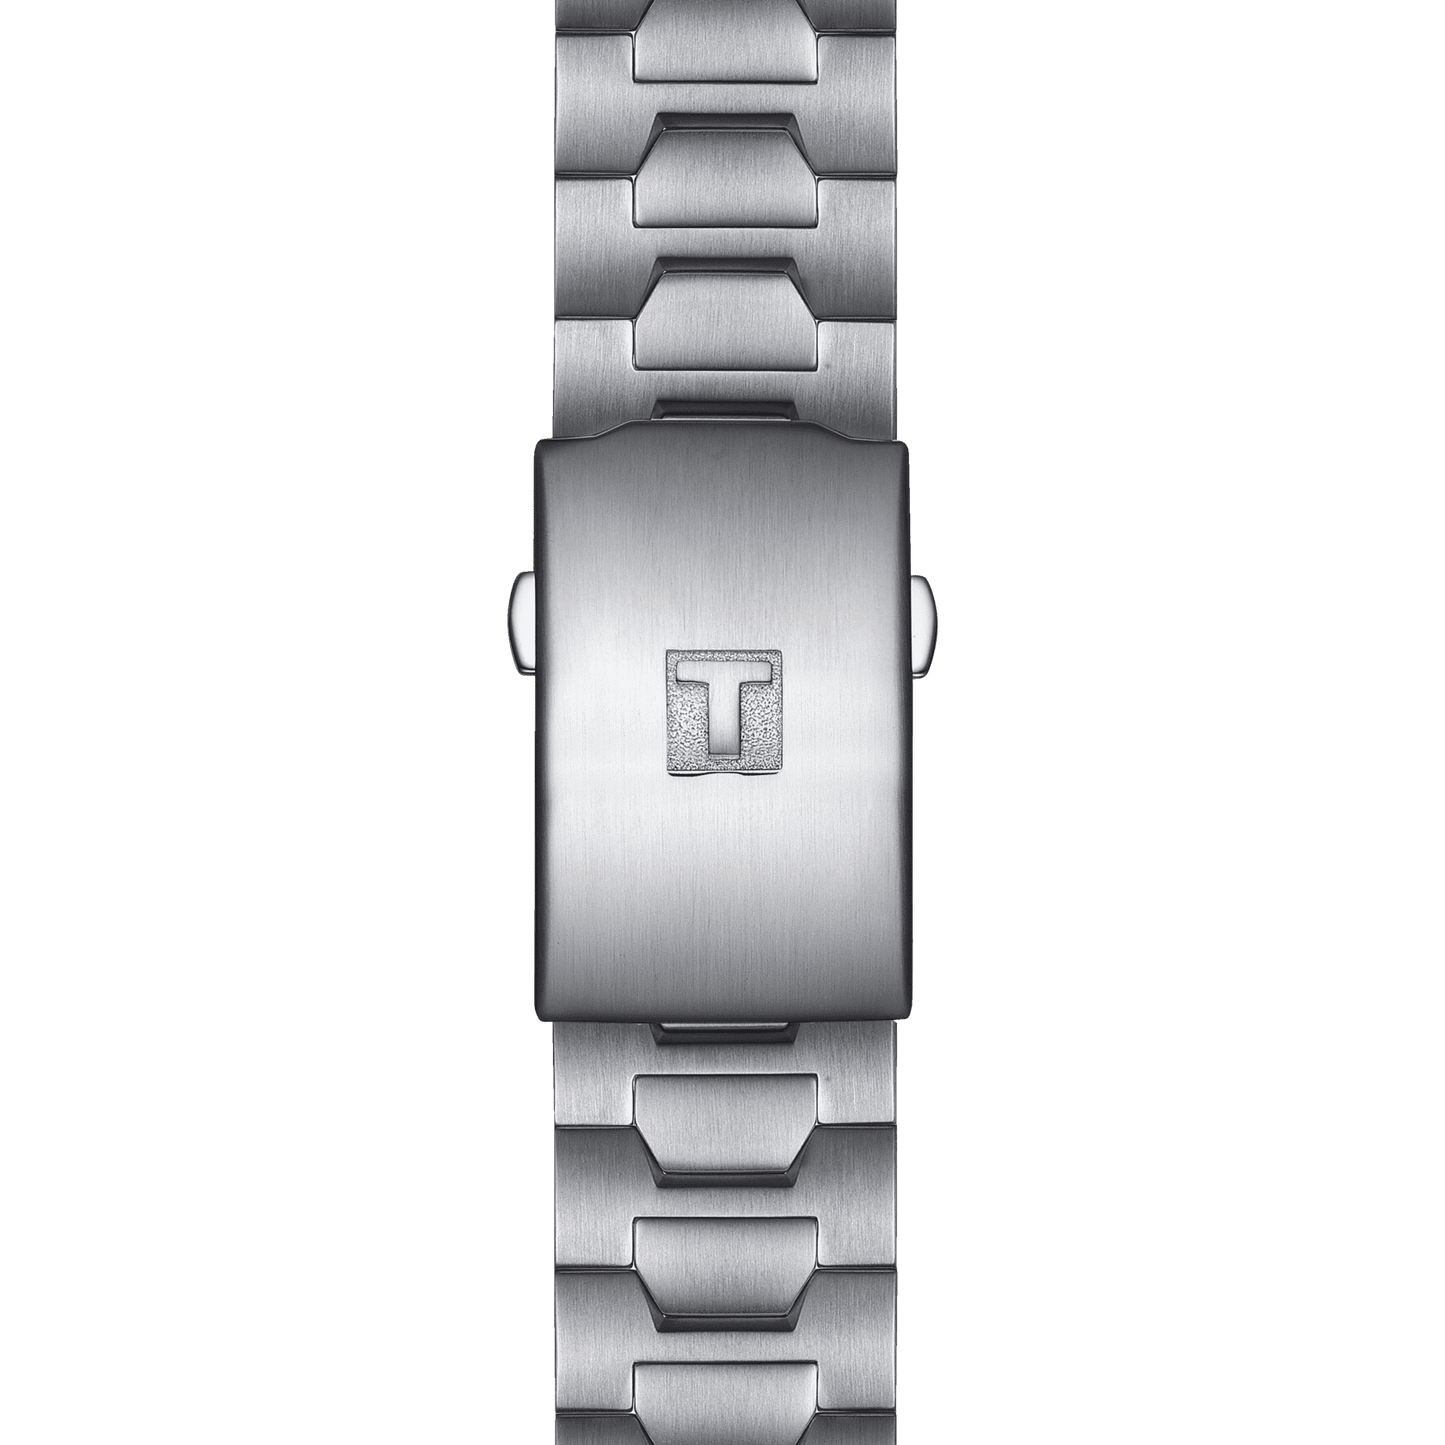 Tissot T-Touch Expert Stainless Steel